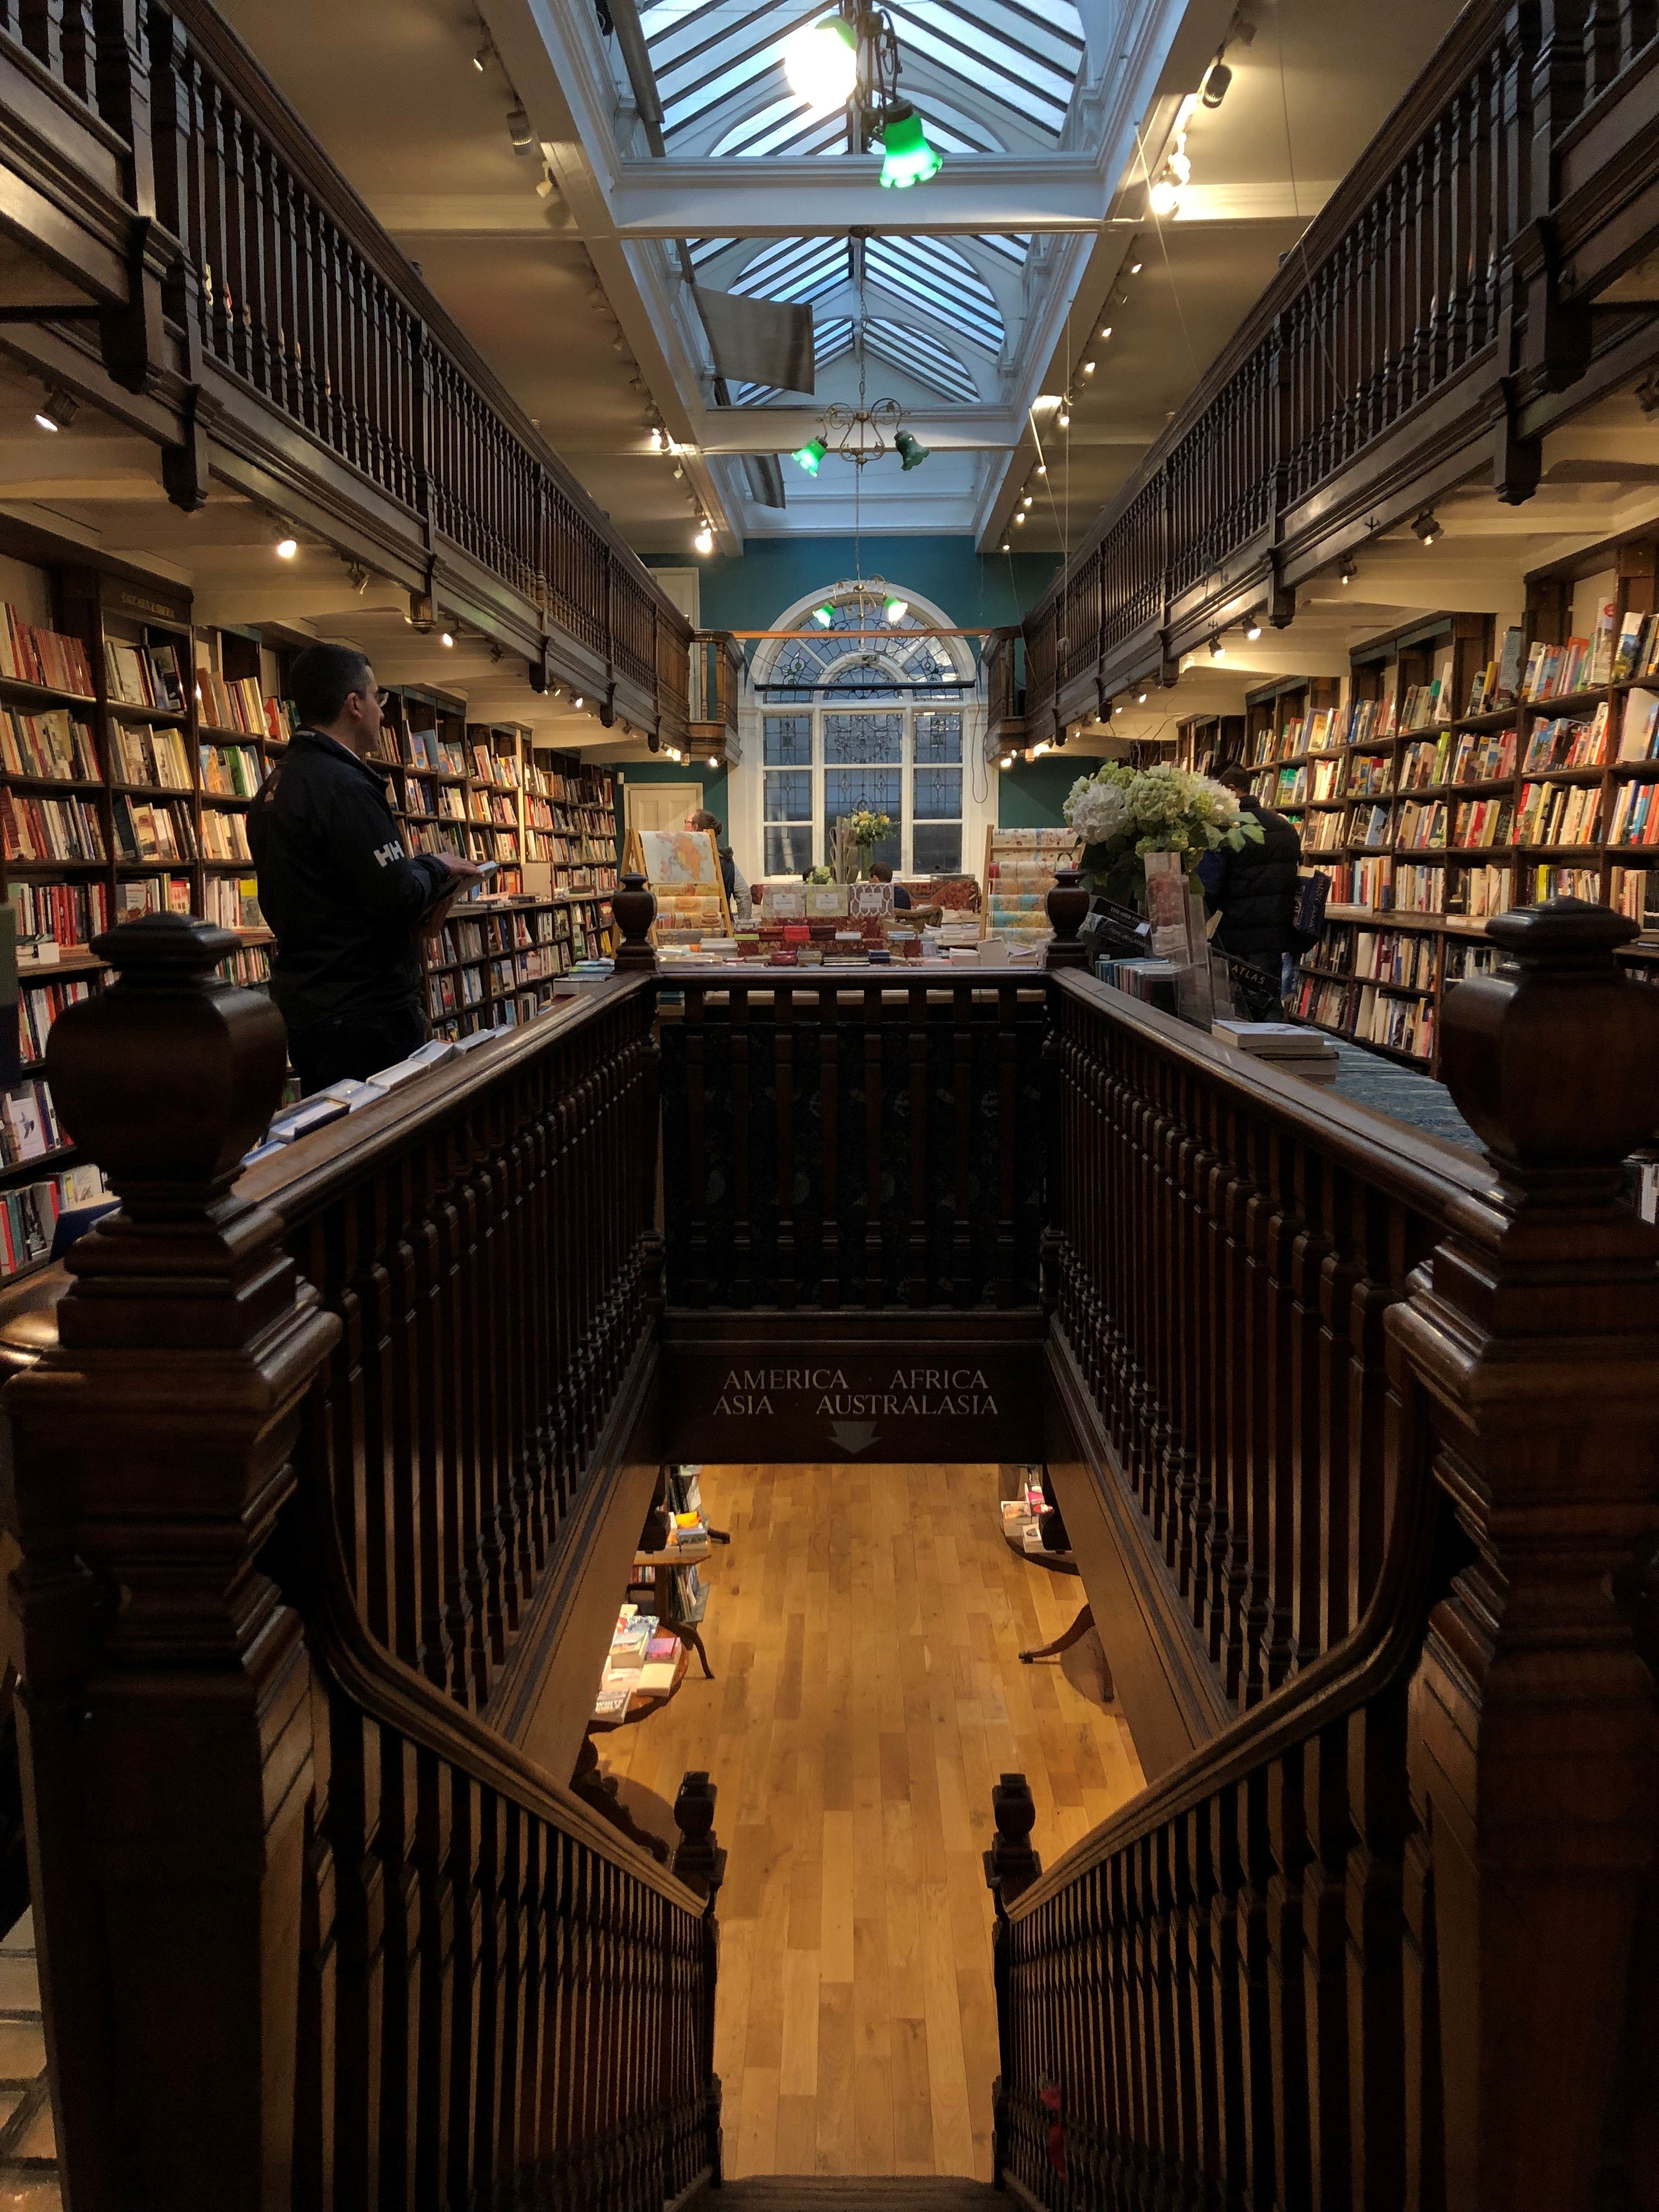 Daunt Books Marylebone bookshop gallery book-lined shelves, sky[light, wooden carved banisters, stairs leading down to lower gallery, green lamps